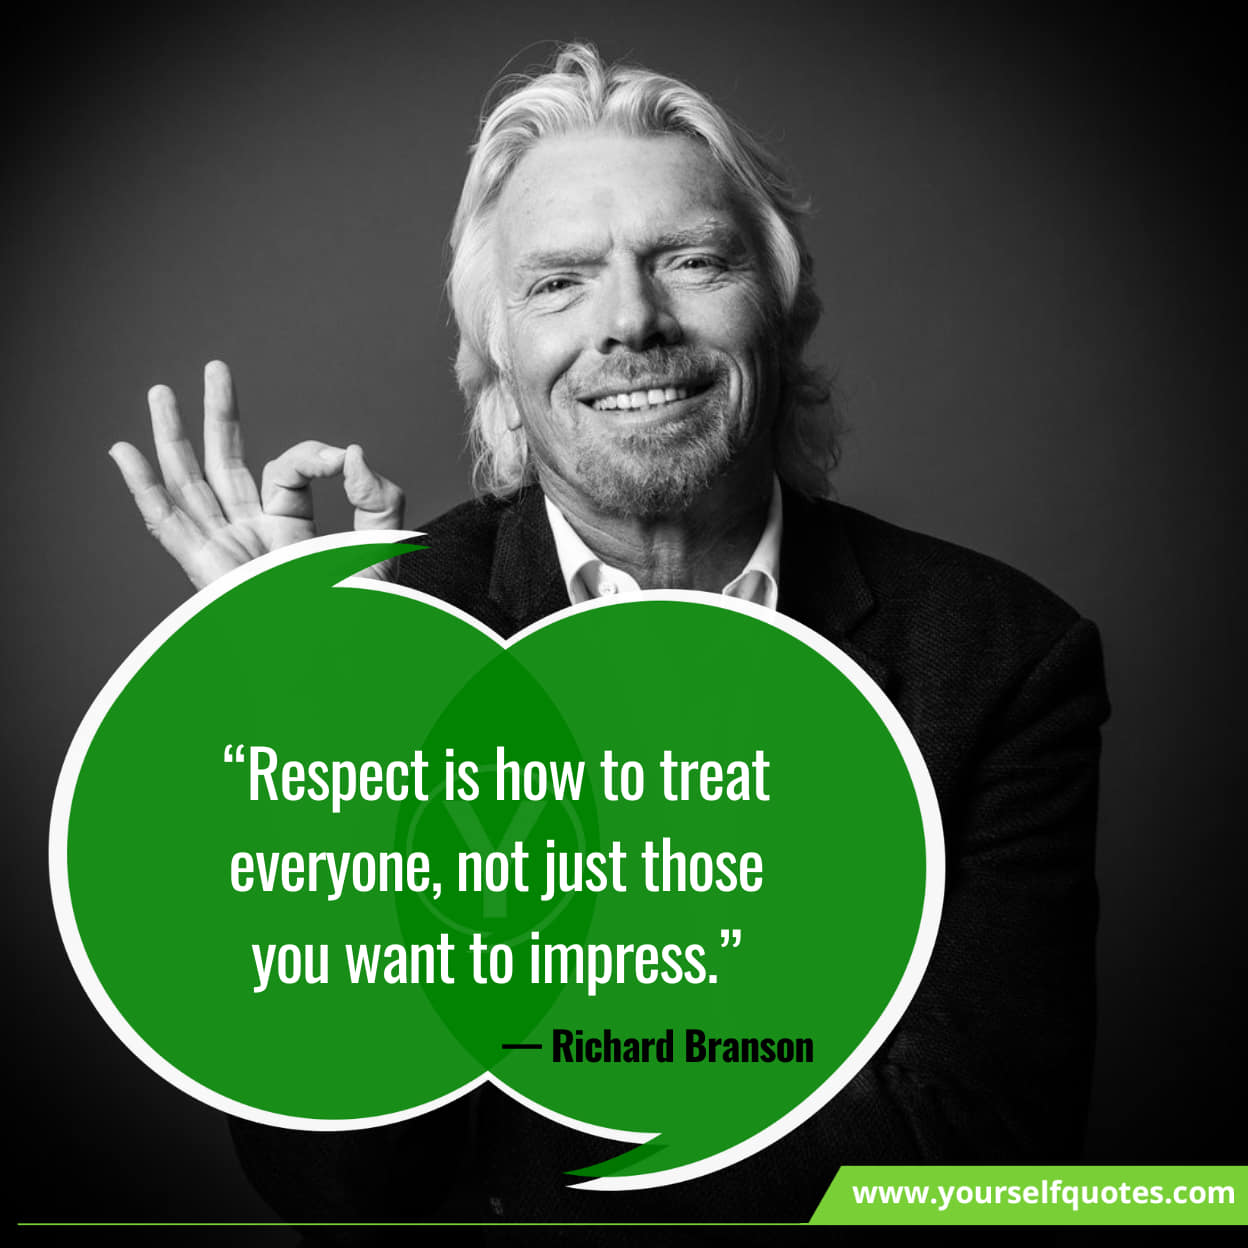 Self-Respect Quotes On Relationship